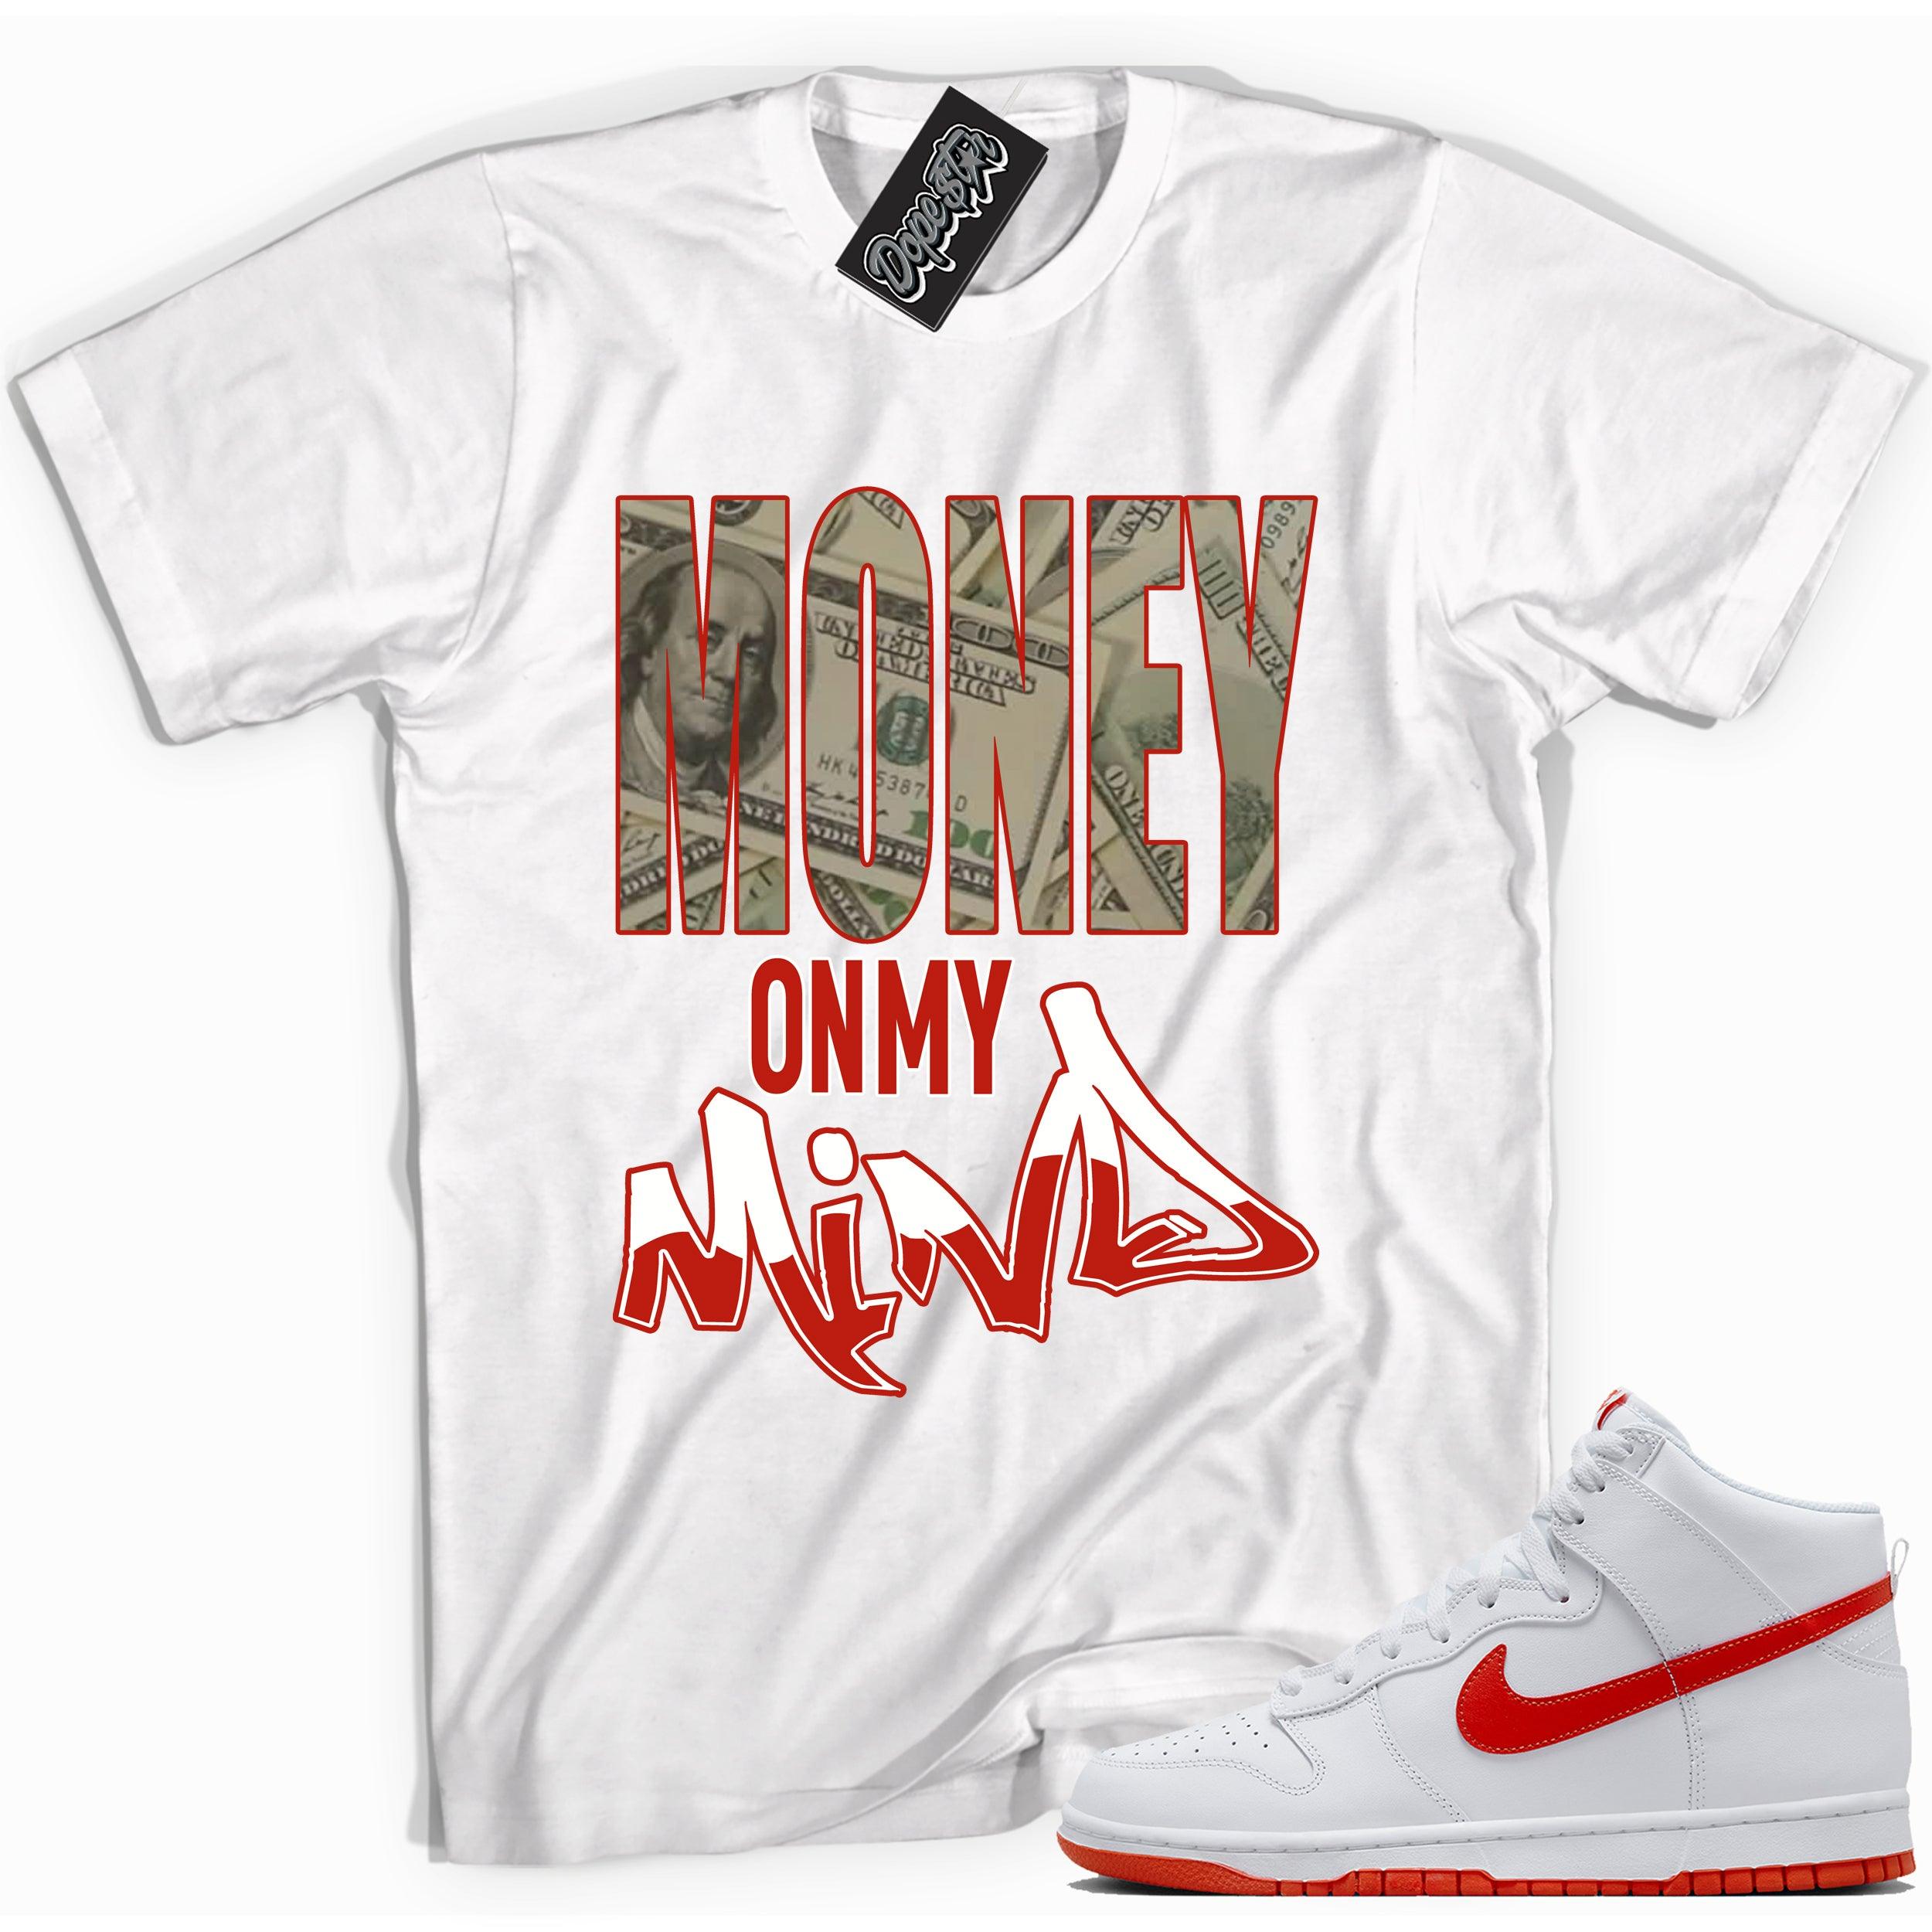 Cool white graphic tee with 'money on my mind' print, that perfectly matches Nike Dunk High White Picante Red sneakers.